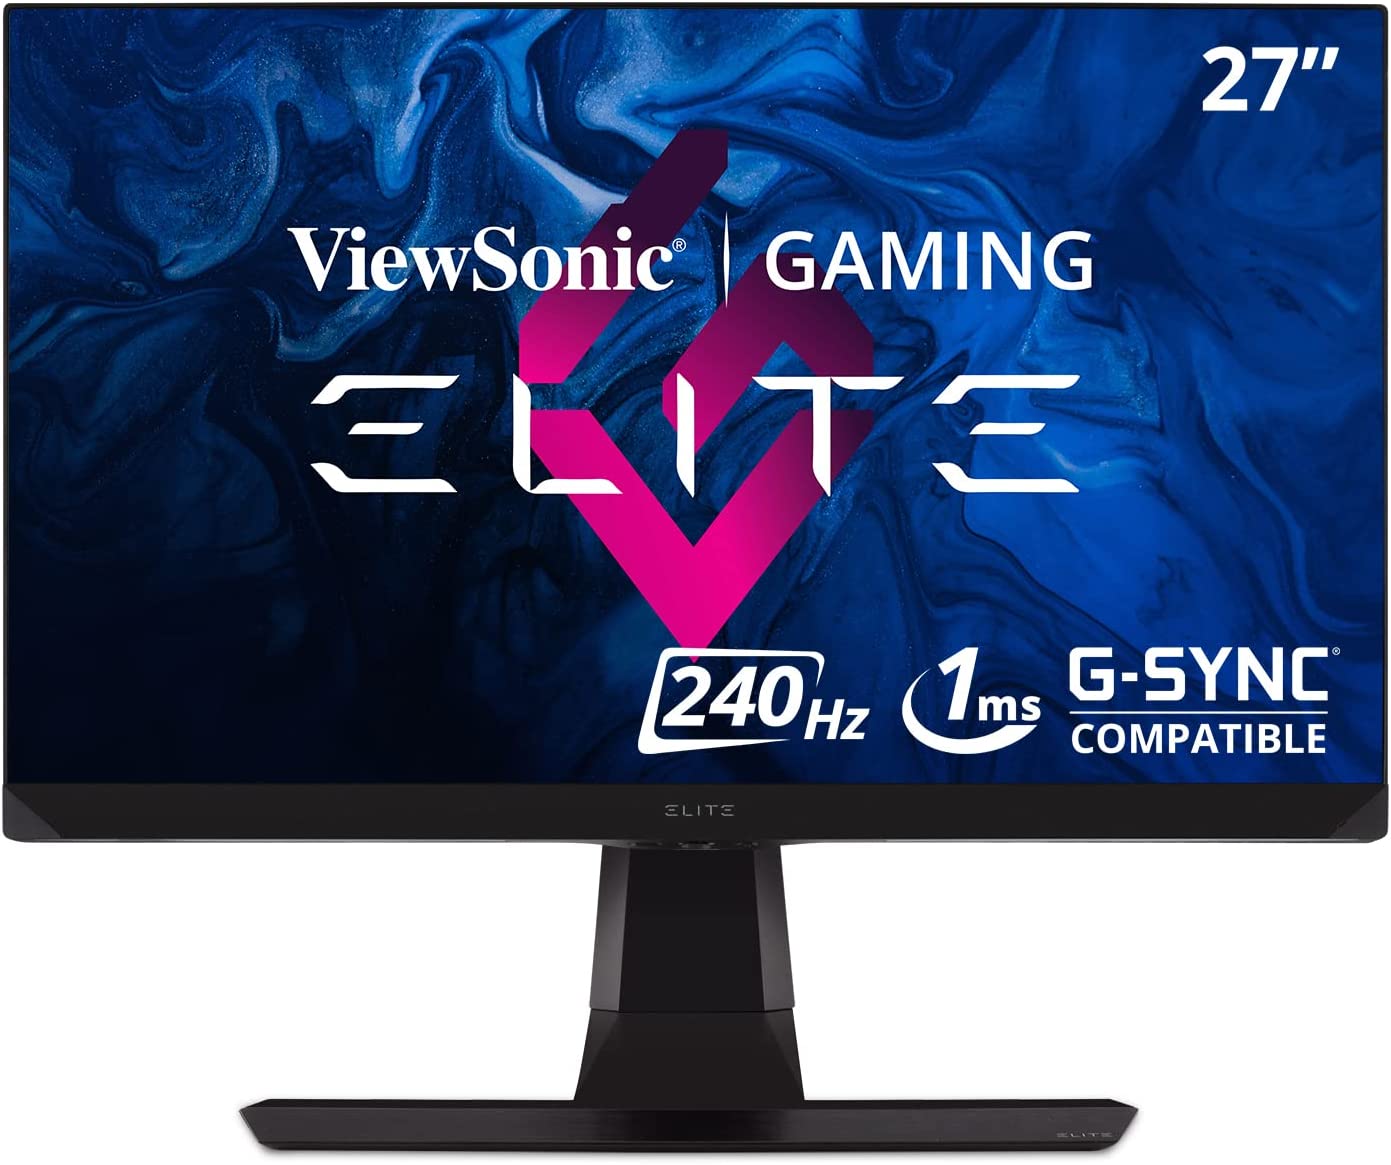 ViewSonic Elite XG270 27-inch Full HD IPS Gaming Monitor with G-Sync Compatibility, 240Hz, 1ms, HDR support, Elite Design Enhancements